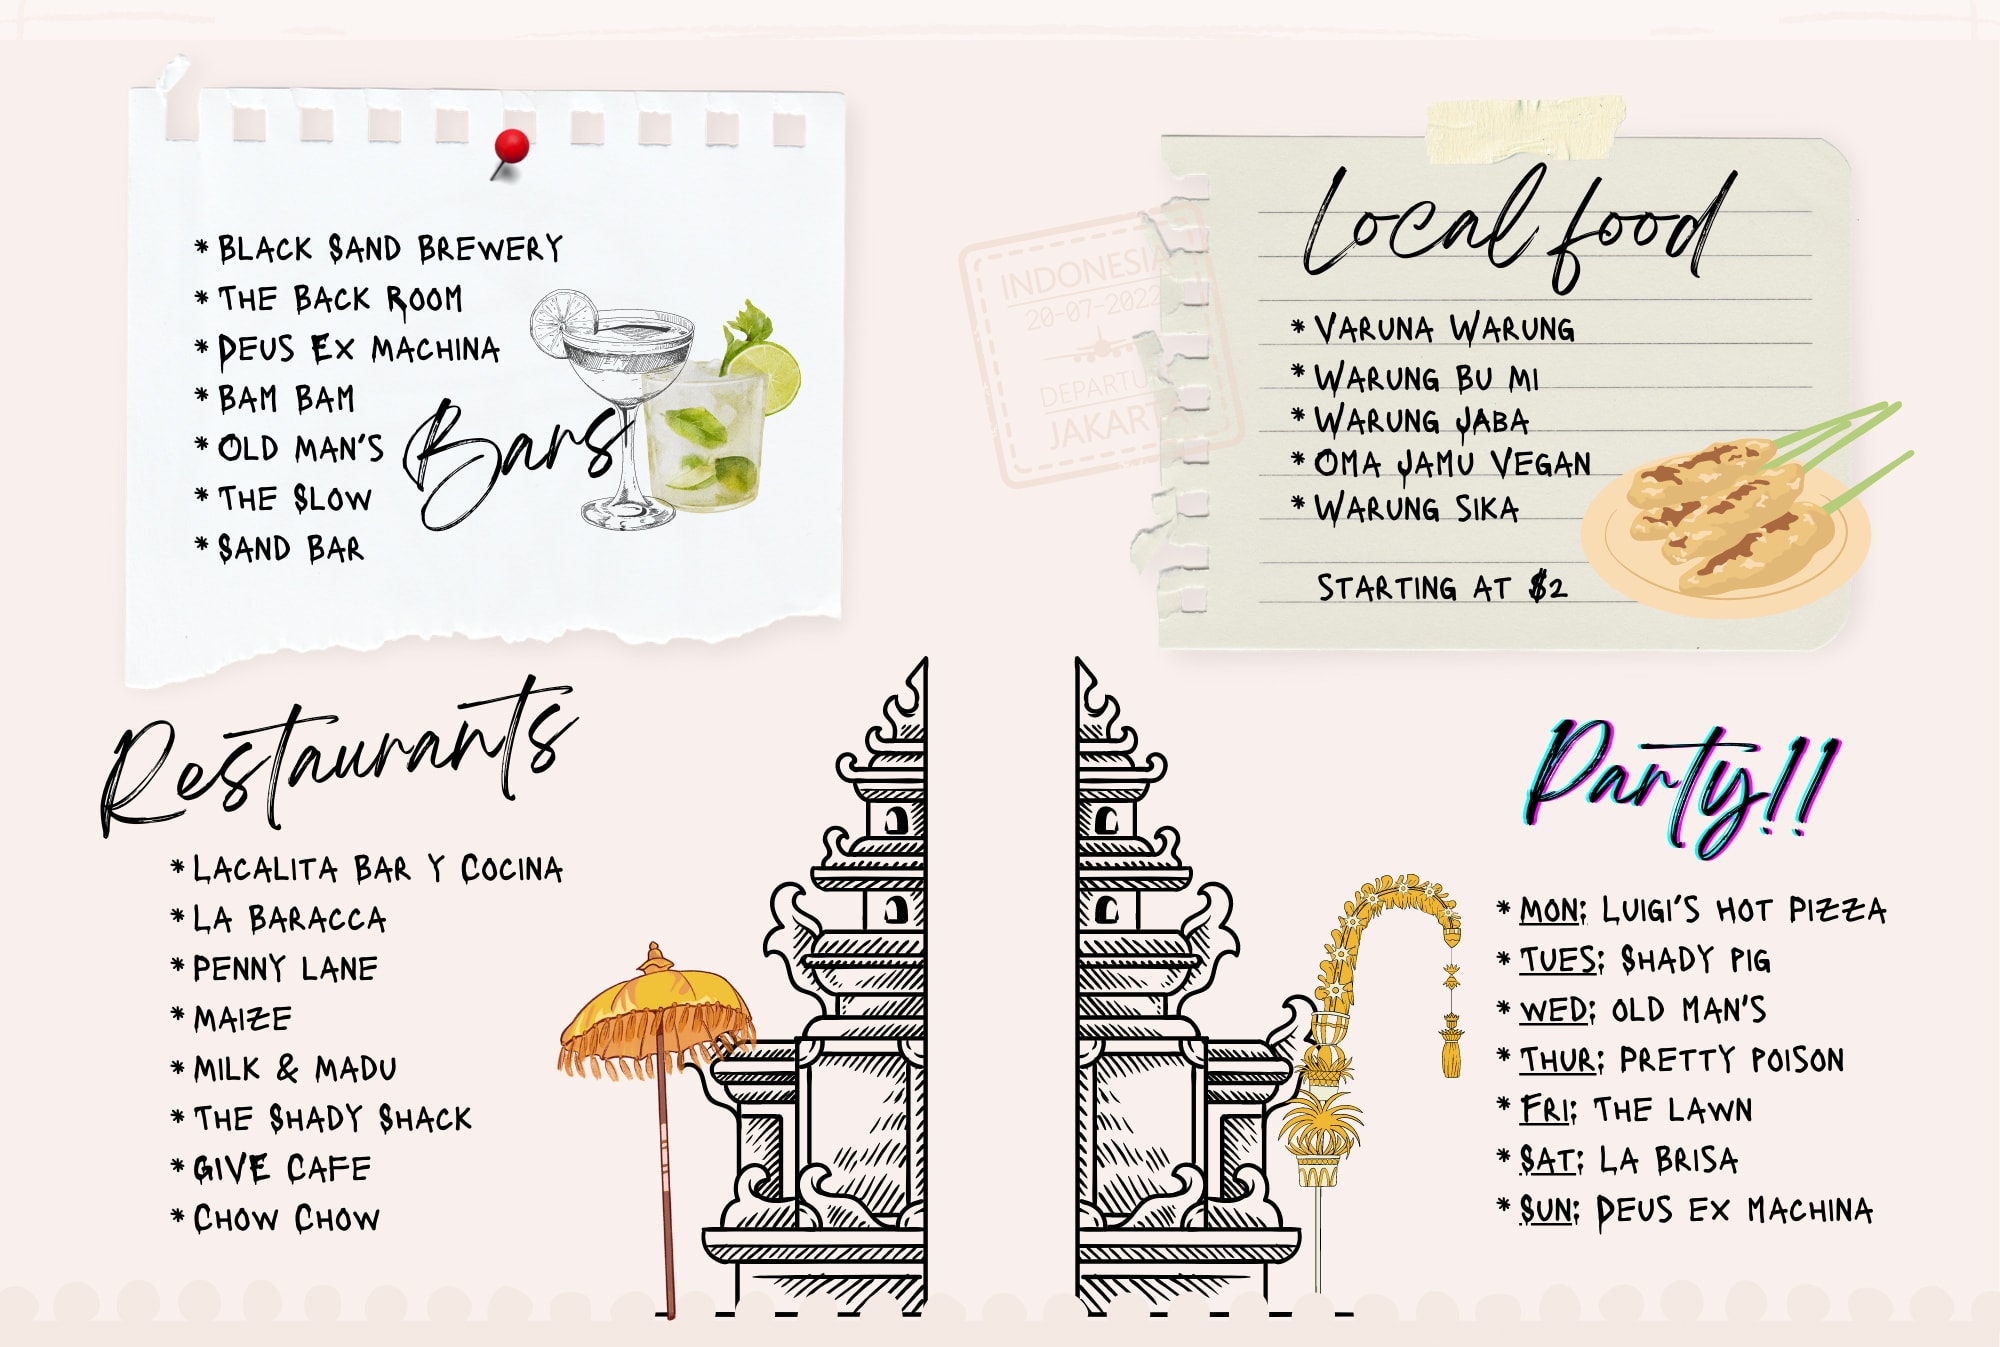 Canggu for digital nomads infographic - Restaurants and bars